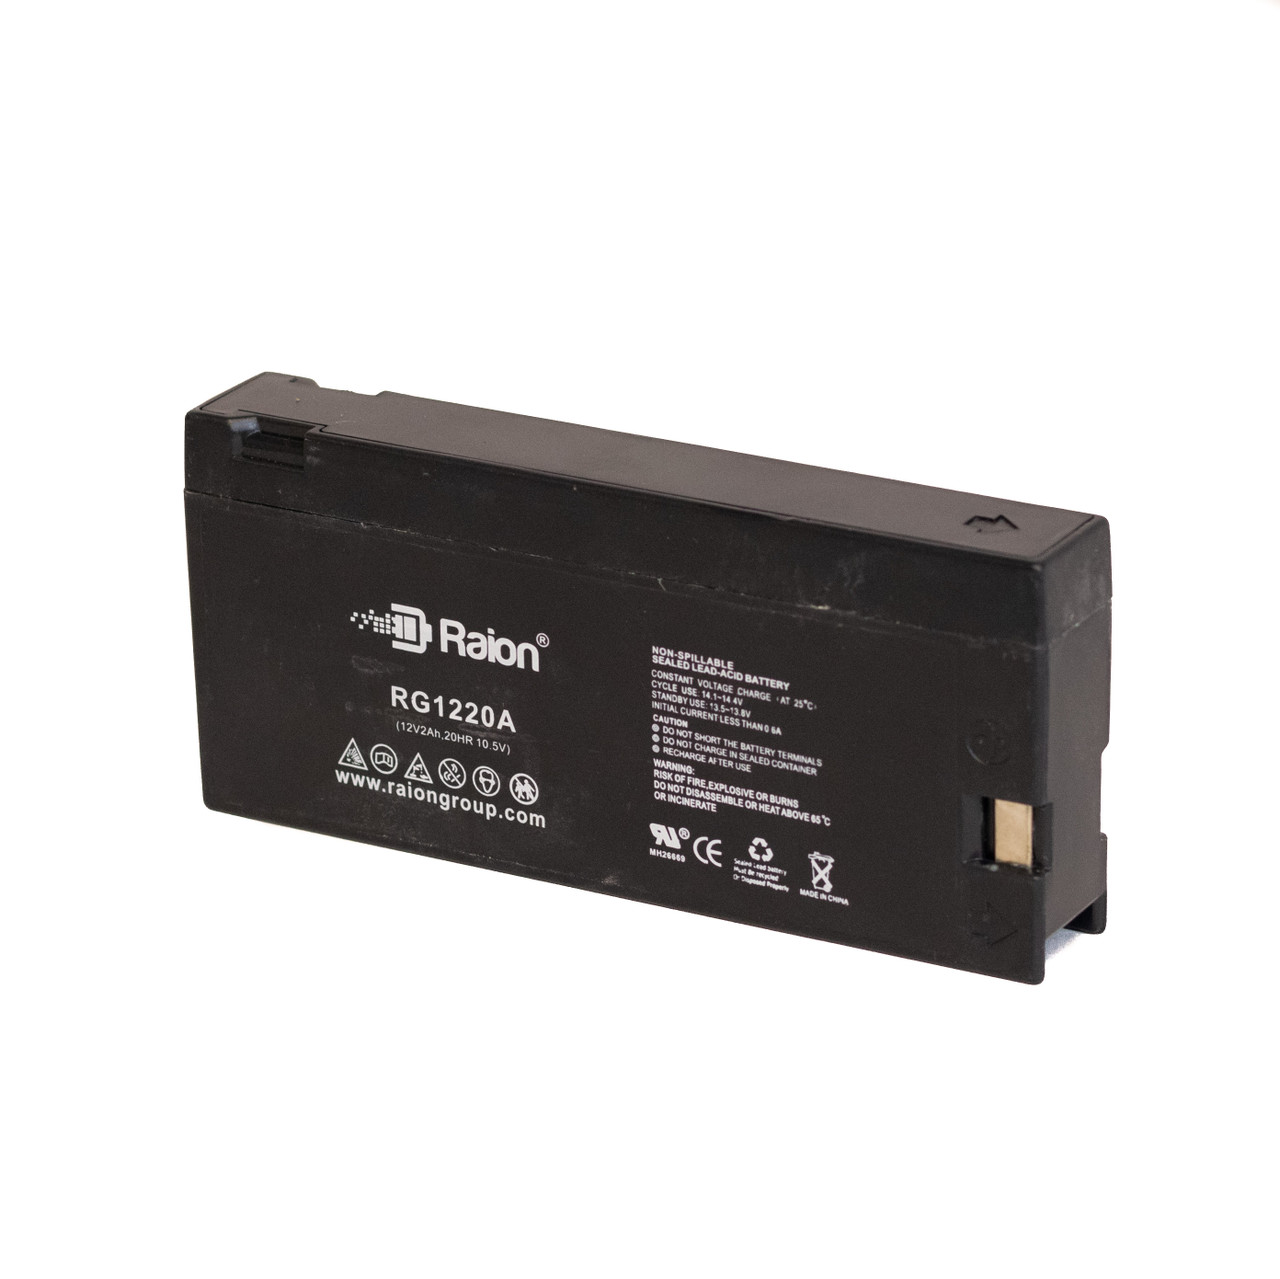 Raion Power RG1220A Replacement Emergency Light Battery for IBT BT1220CR